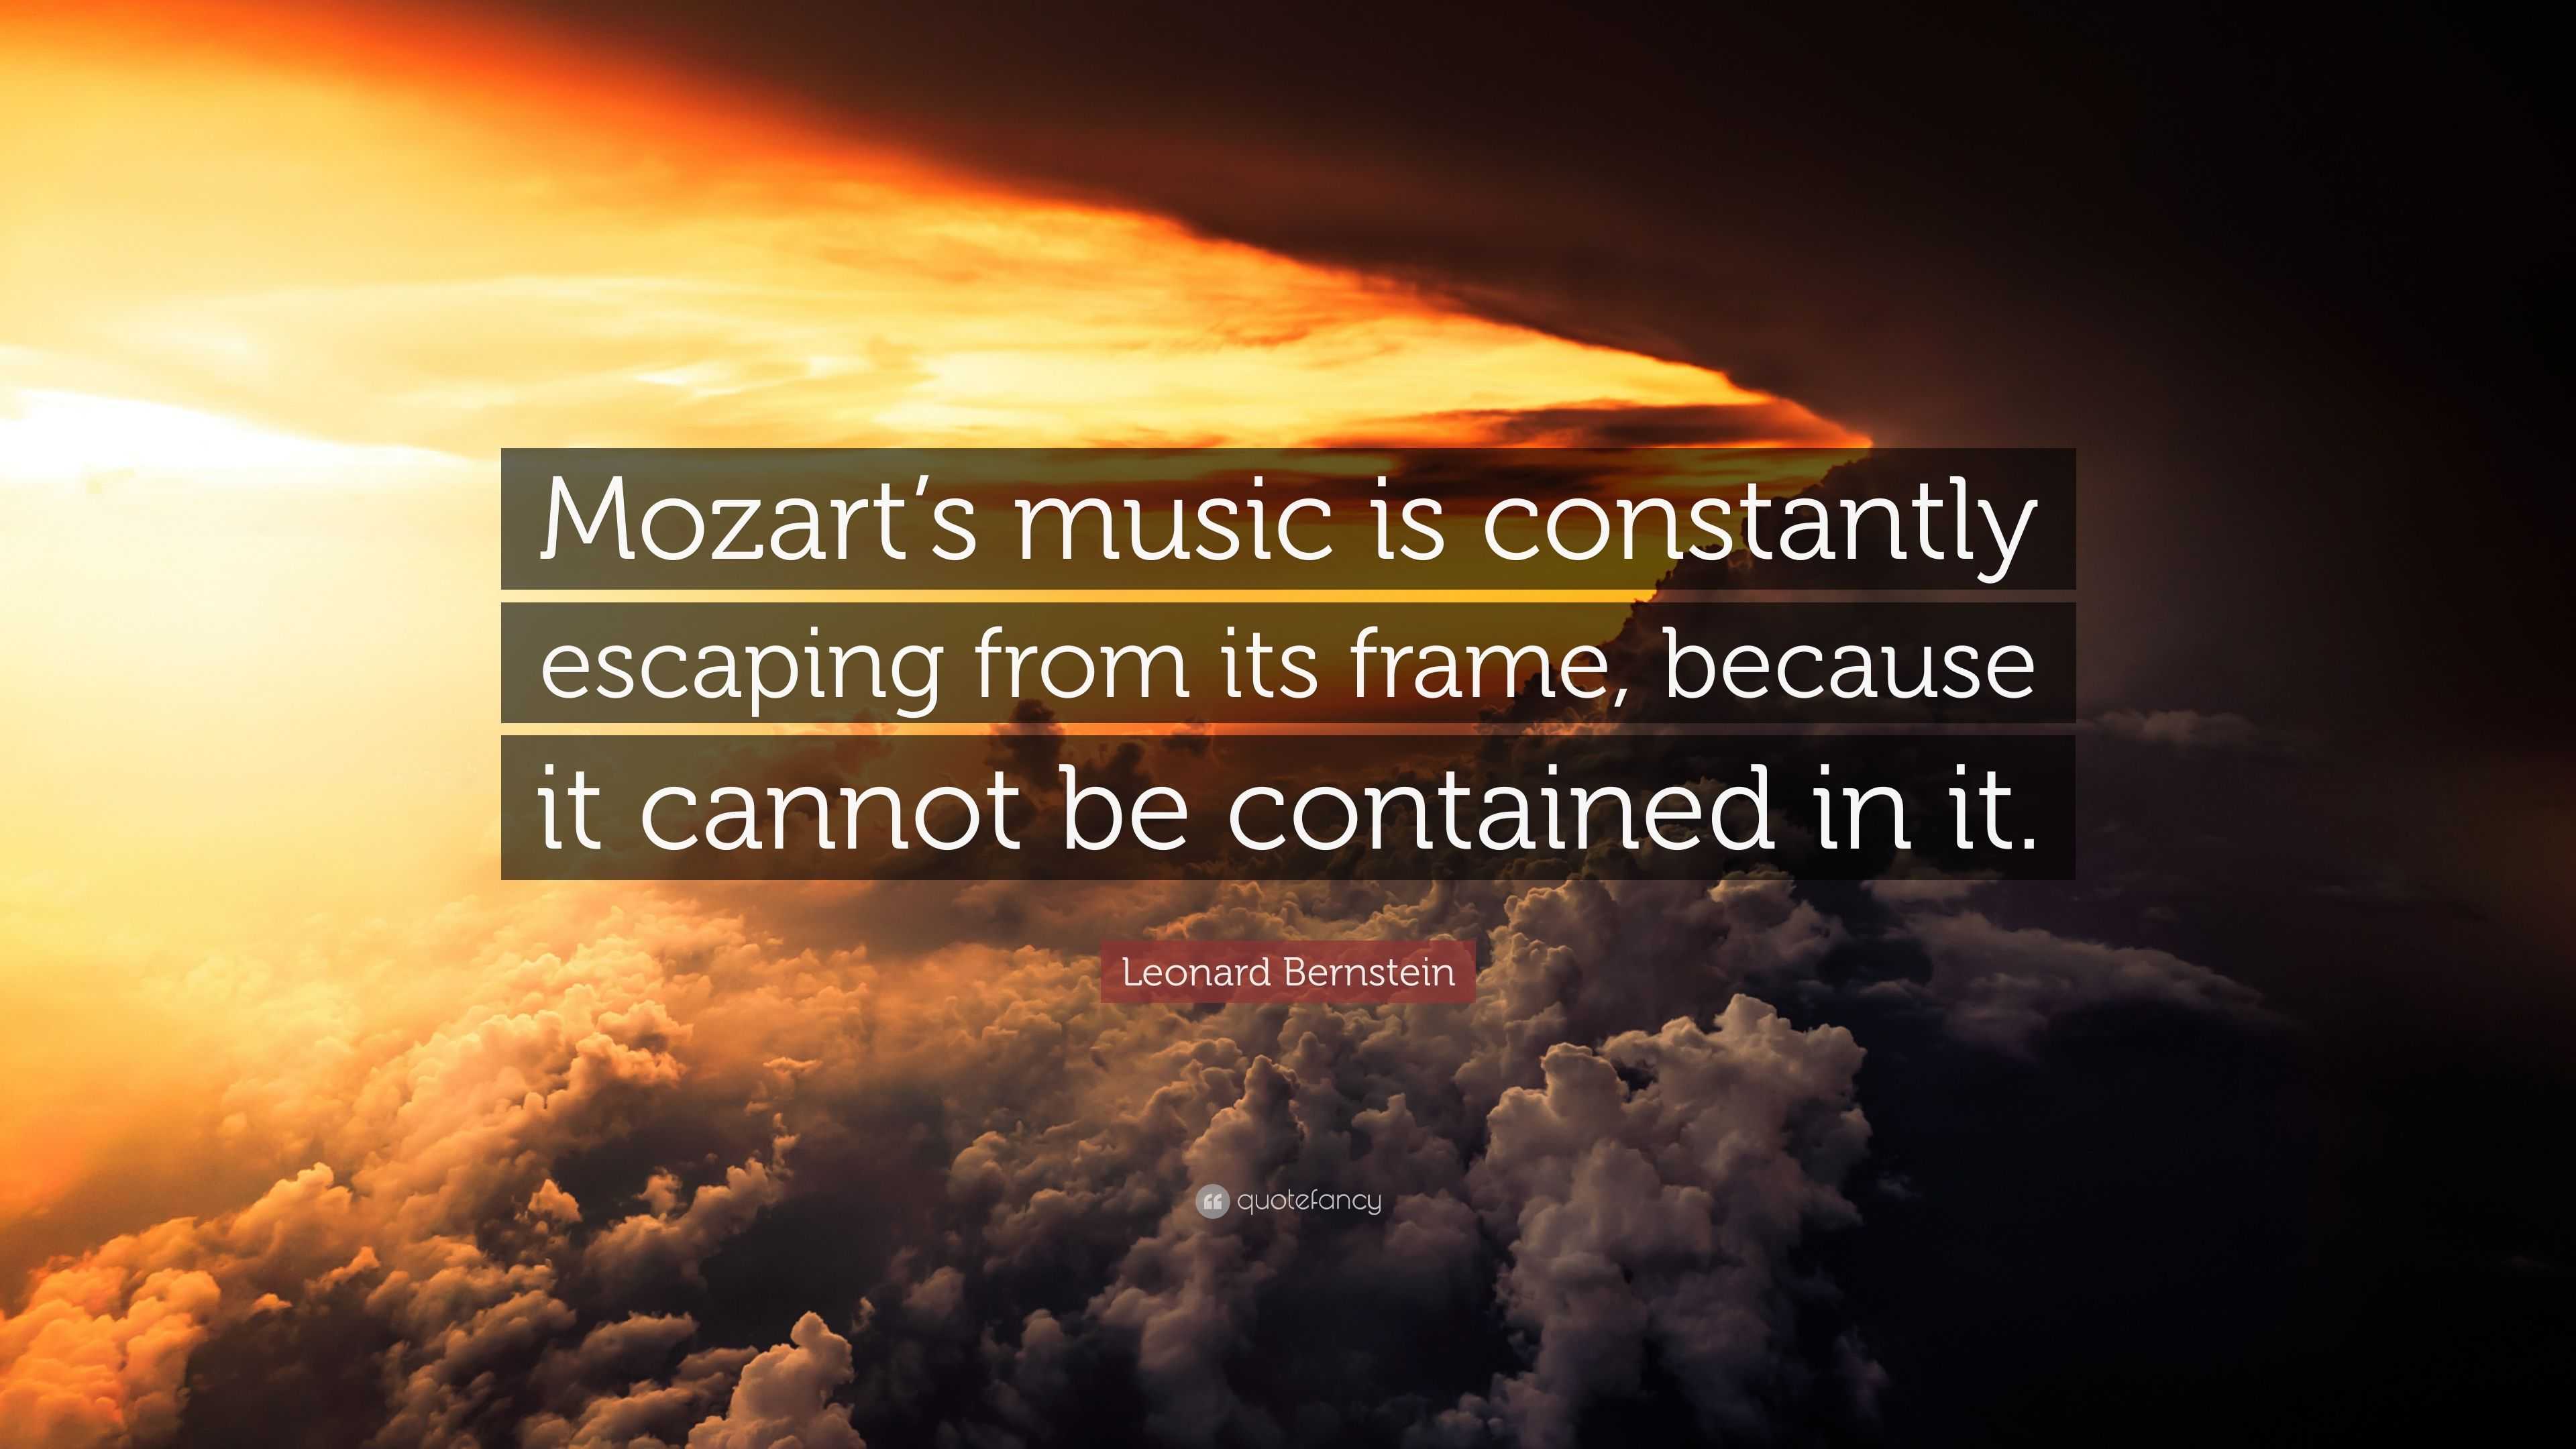 Leonard Bernstein Quote: “Mozart’s music is constantly escaping from ...